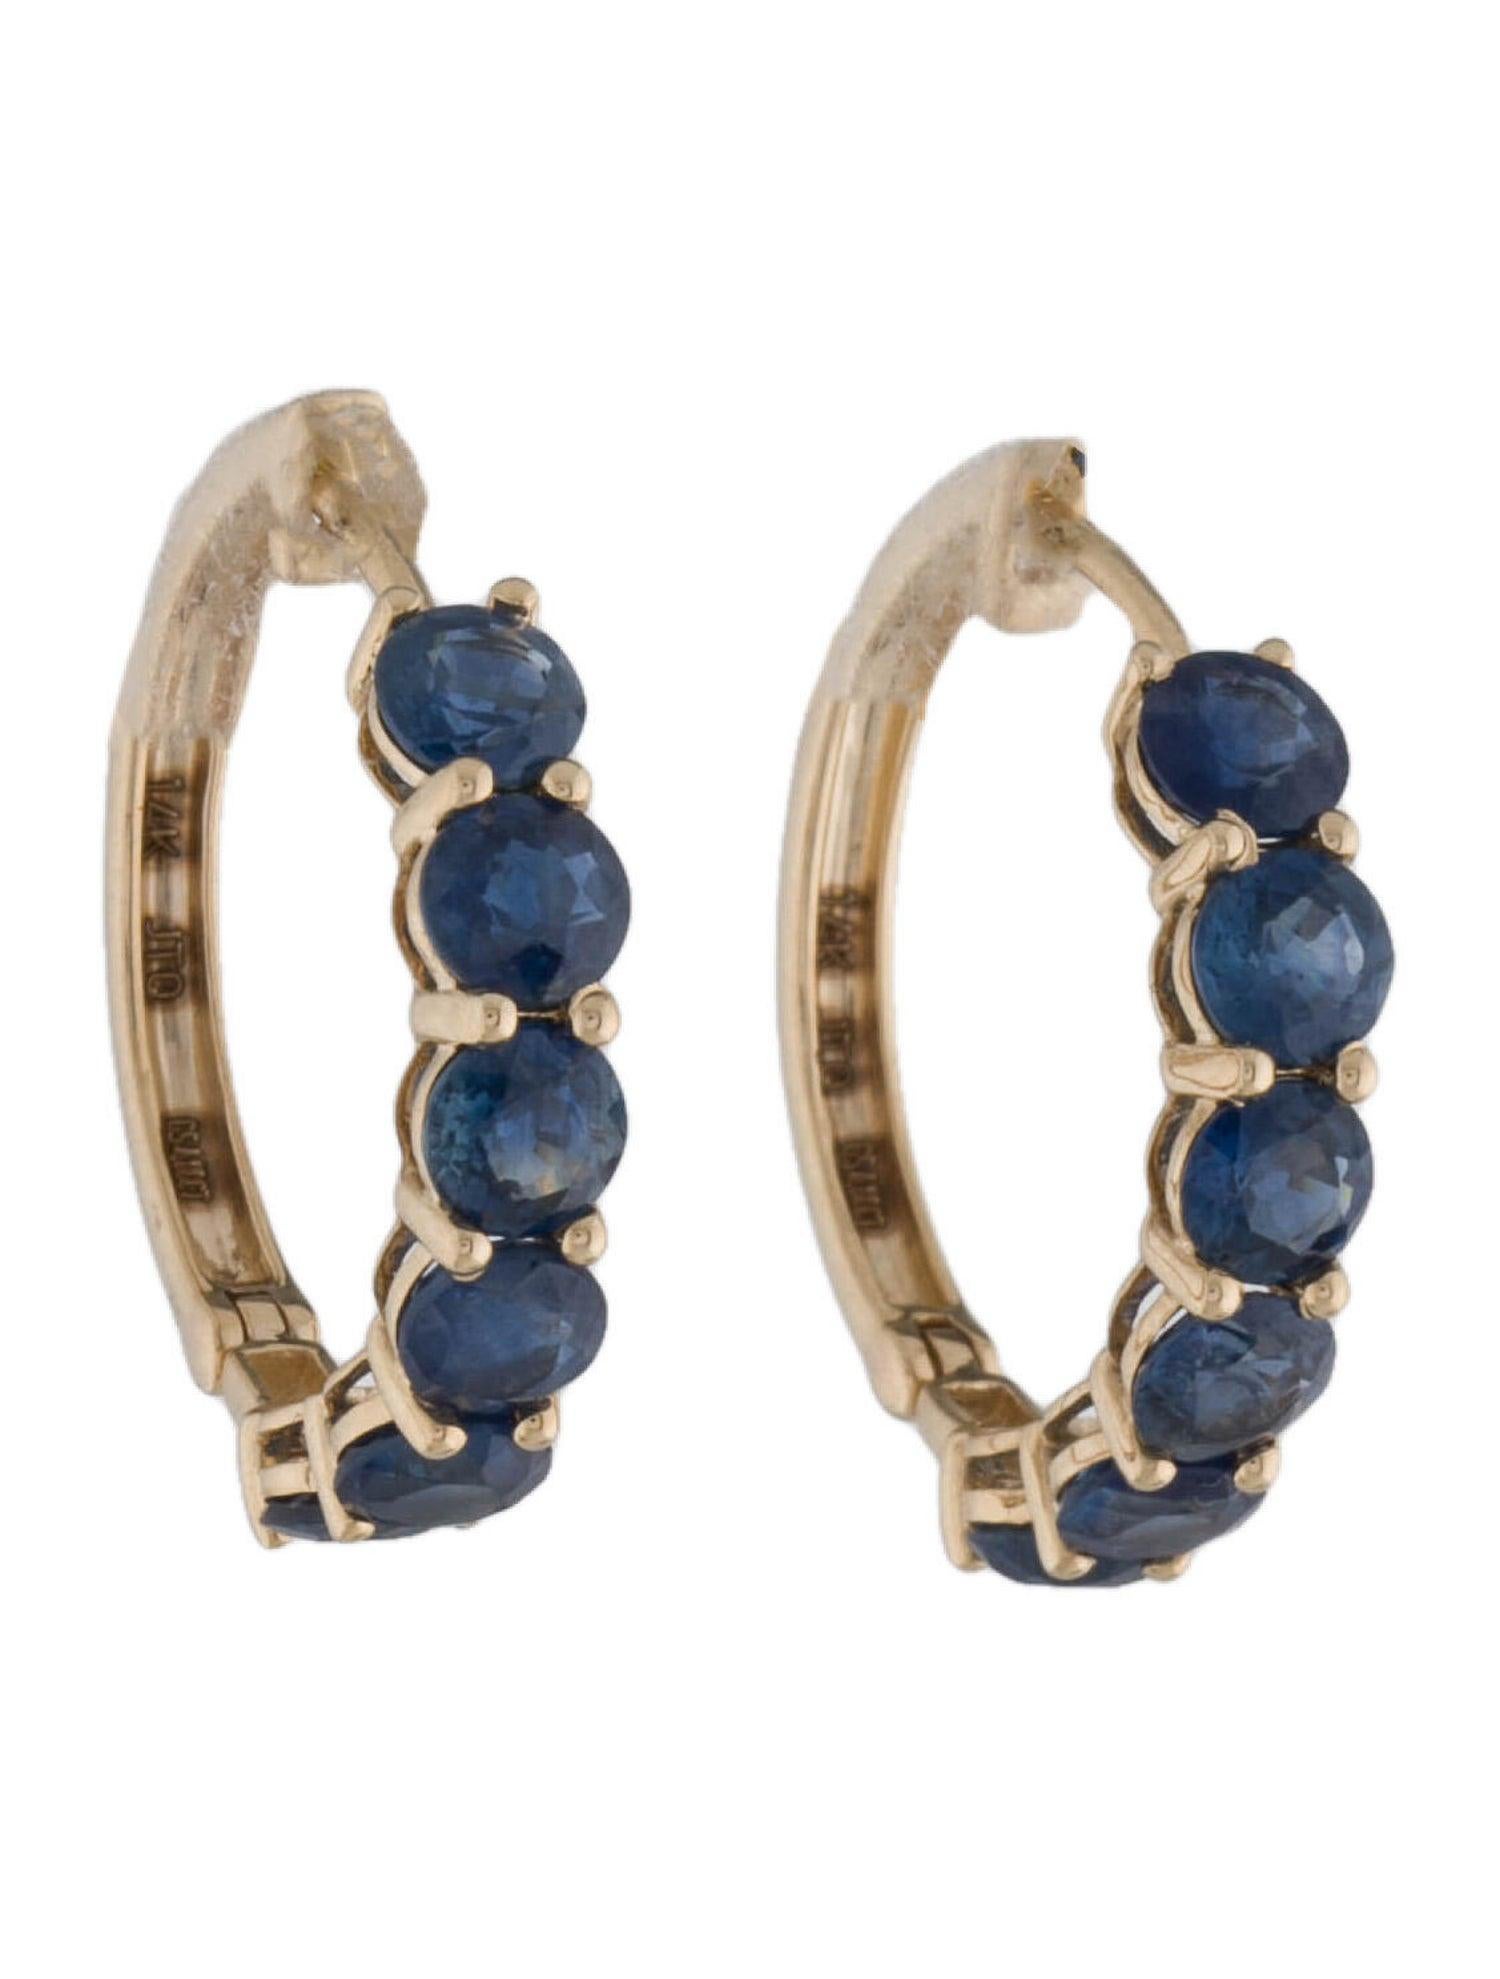 14K Sapphire Hoop Earrings - 3.31ctw, Elegant Gemstone Jewelry, Timeless Style In New Condition For Sale In Holtsville, NY